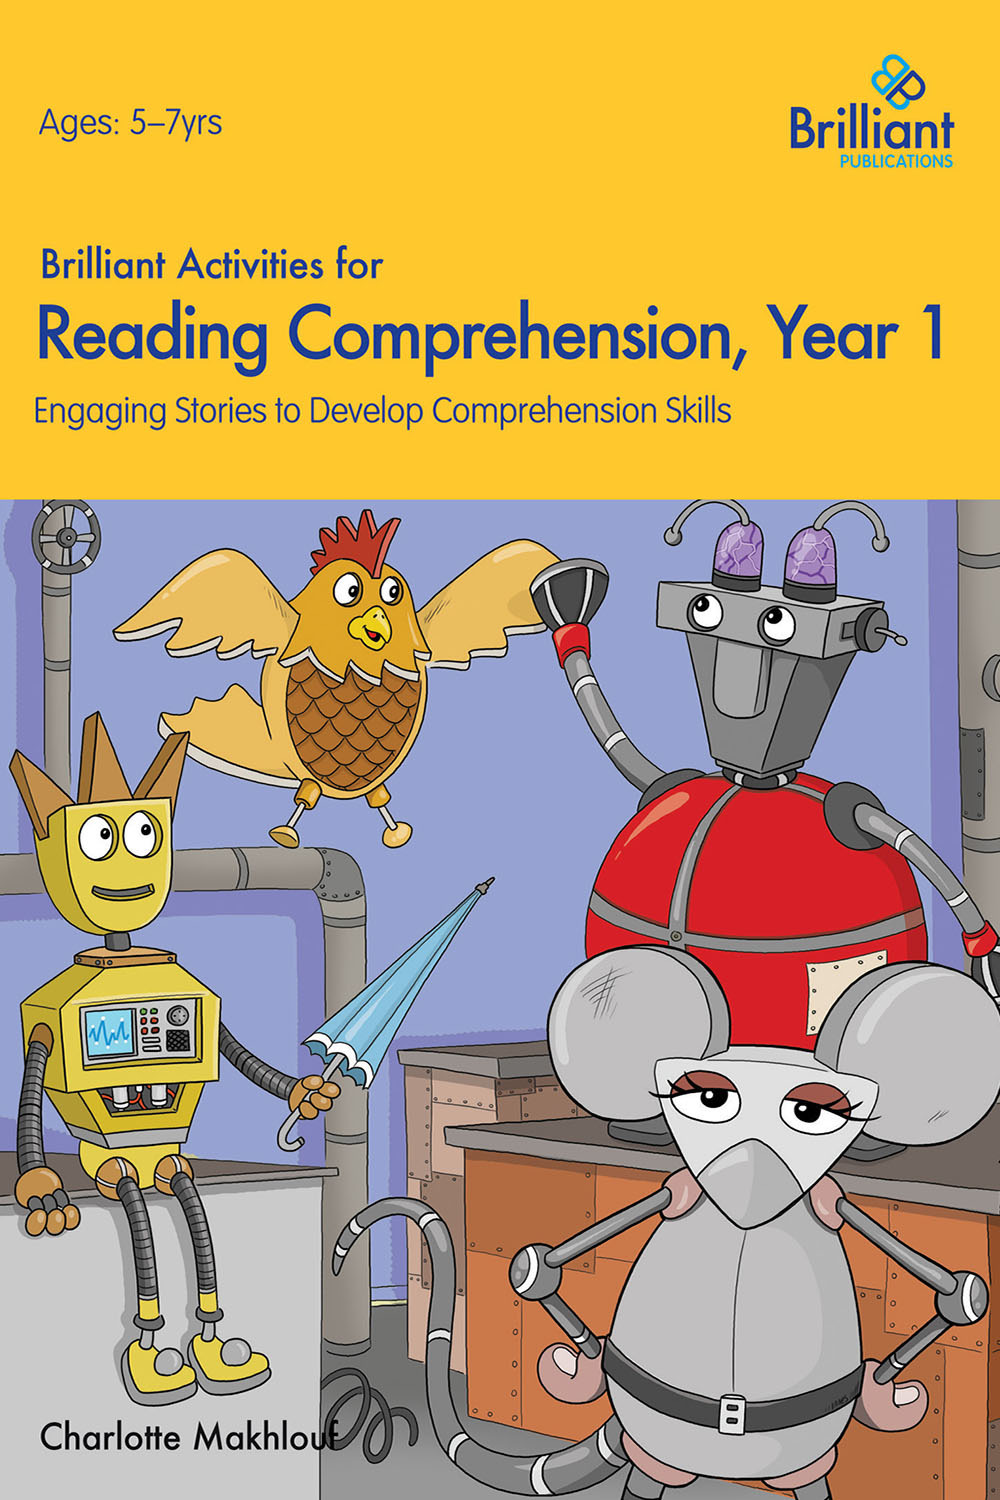 Makhlouf, Charlotte - Brilliant Activities for Reading Comprehension Year 1, ebook